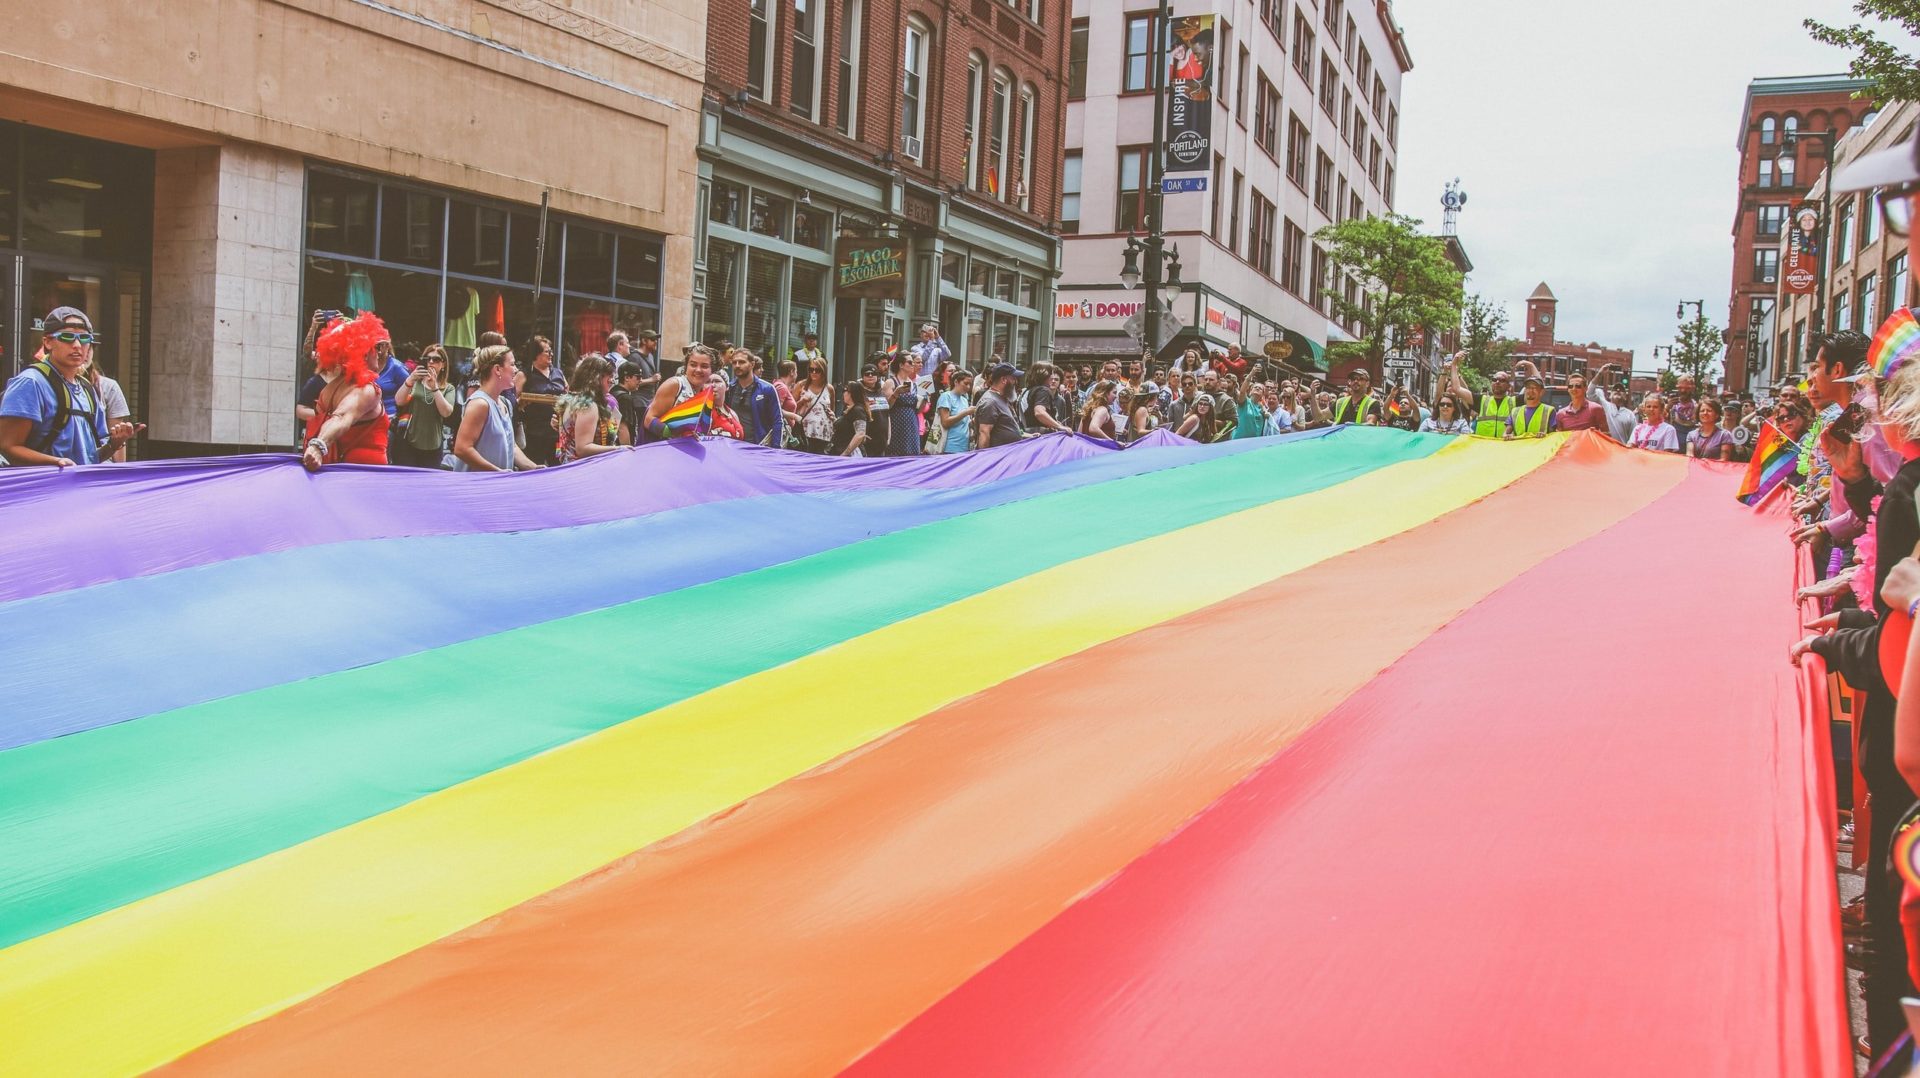 Portland, Maine residents carry the large rainbow flag down Congress Street during the annual Pride parade (Photo by Mercedes Mehling | Unsplash)